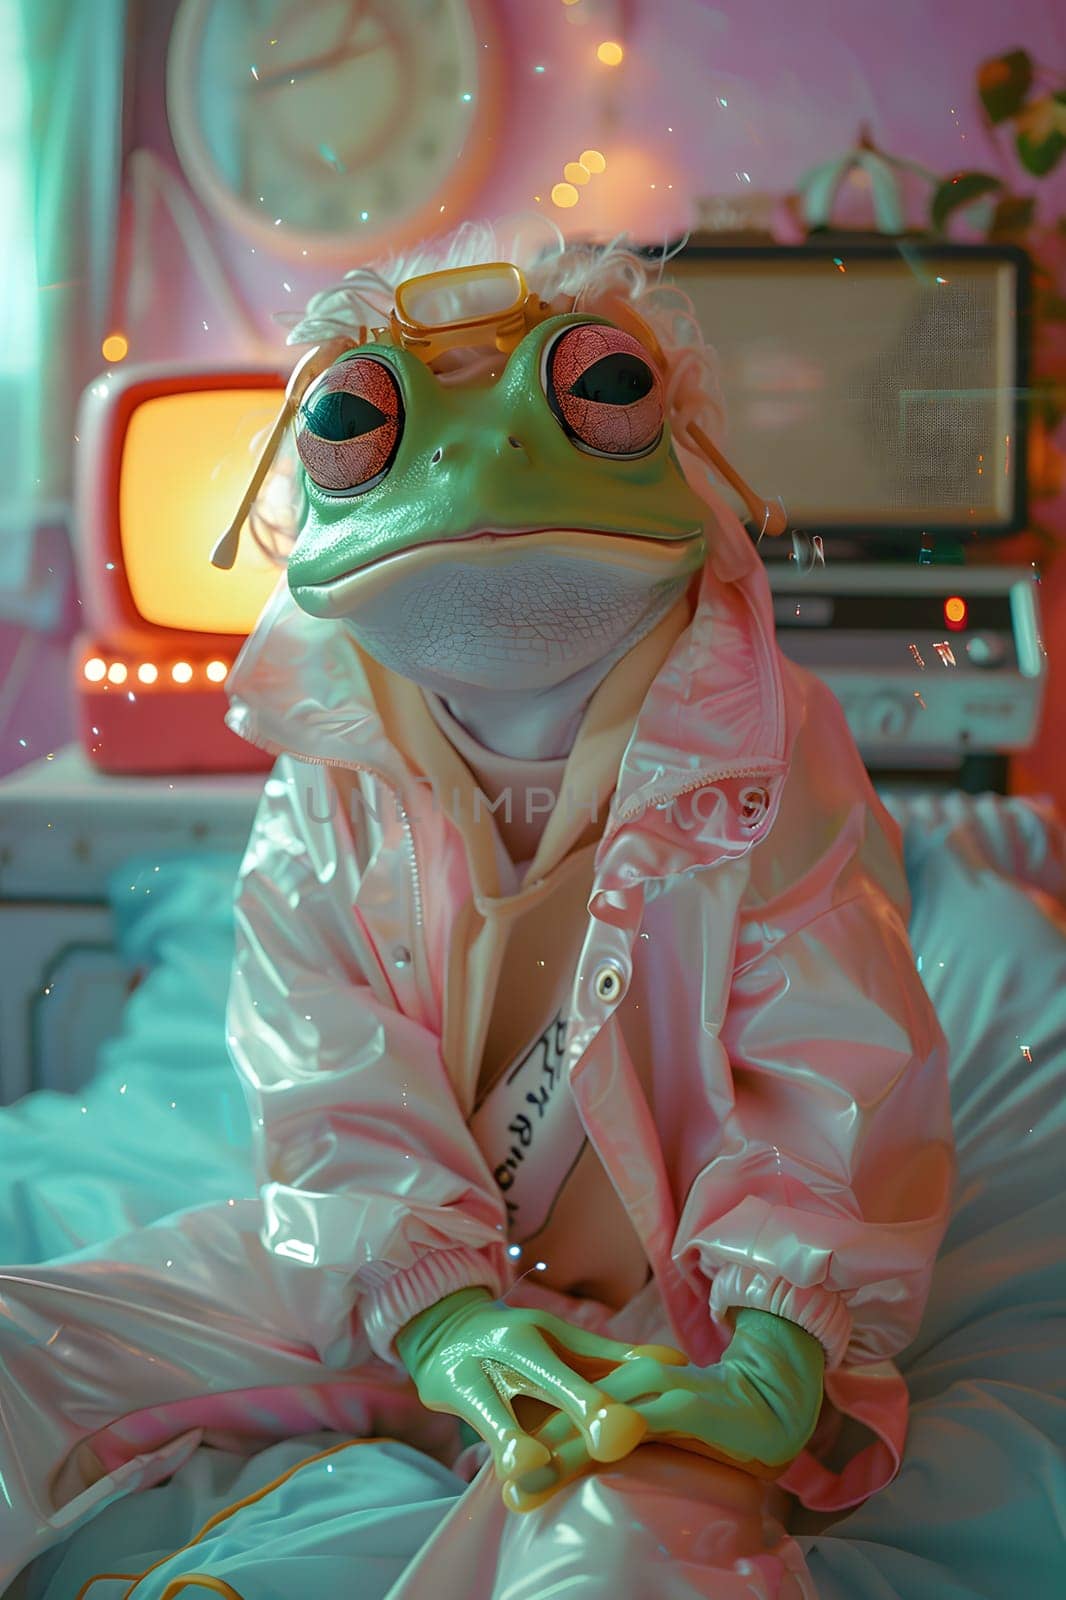 A toy amphibian fictional character in a pink jacket and sunglasses is sitting on a bed. This plastic action figure adds fun to any event with its magenta attire